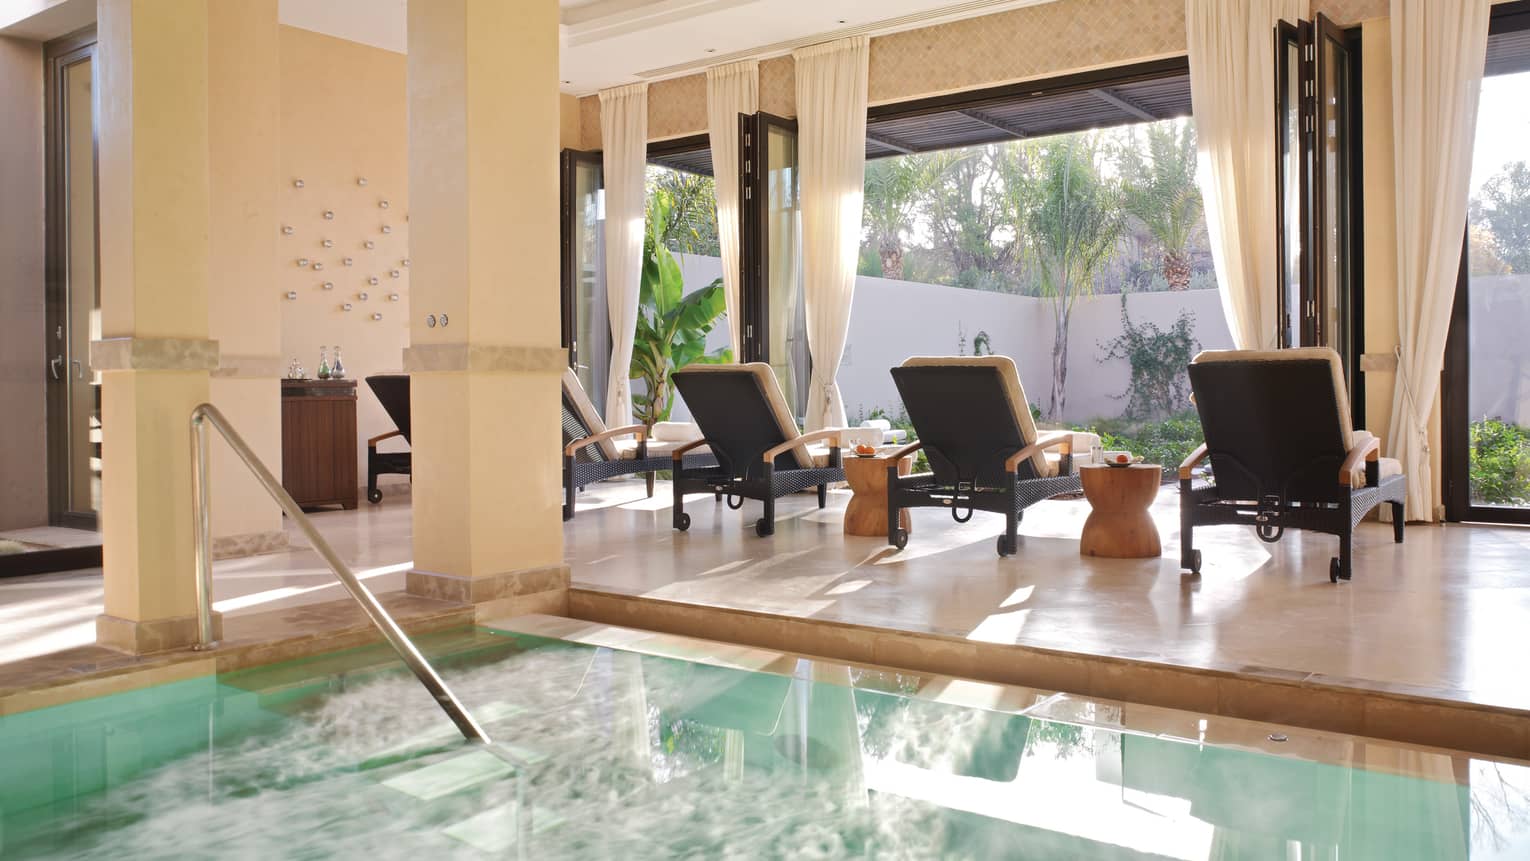 Three lounge chairs at sunny window by steps to Spa plunge pool